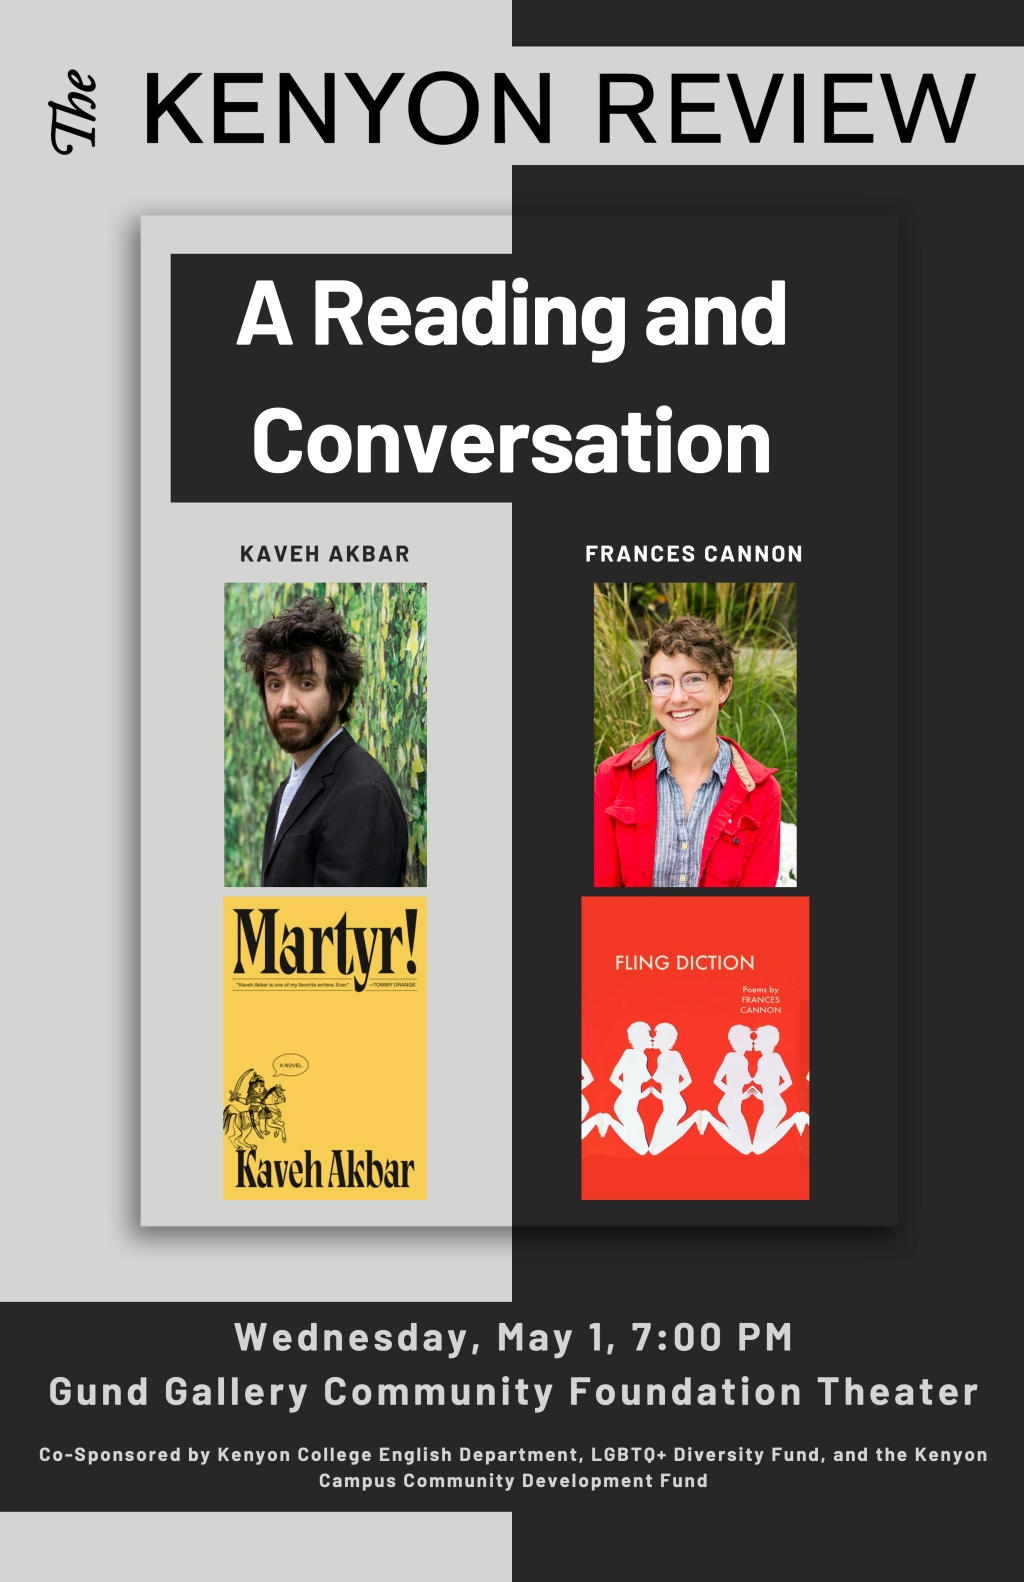 Kaveh Akbar and Frances Cannon in conversation